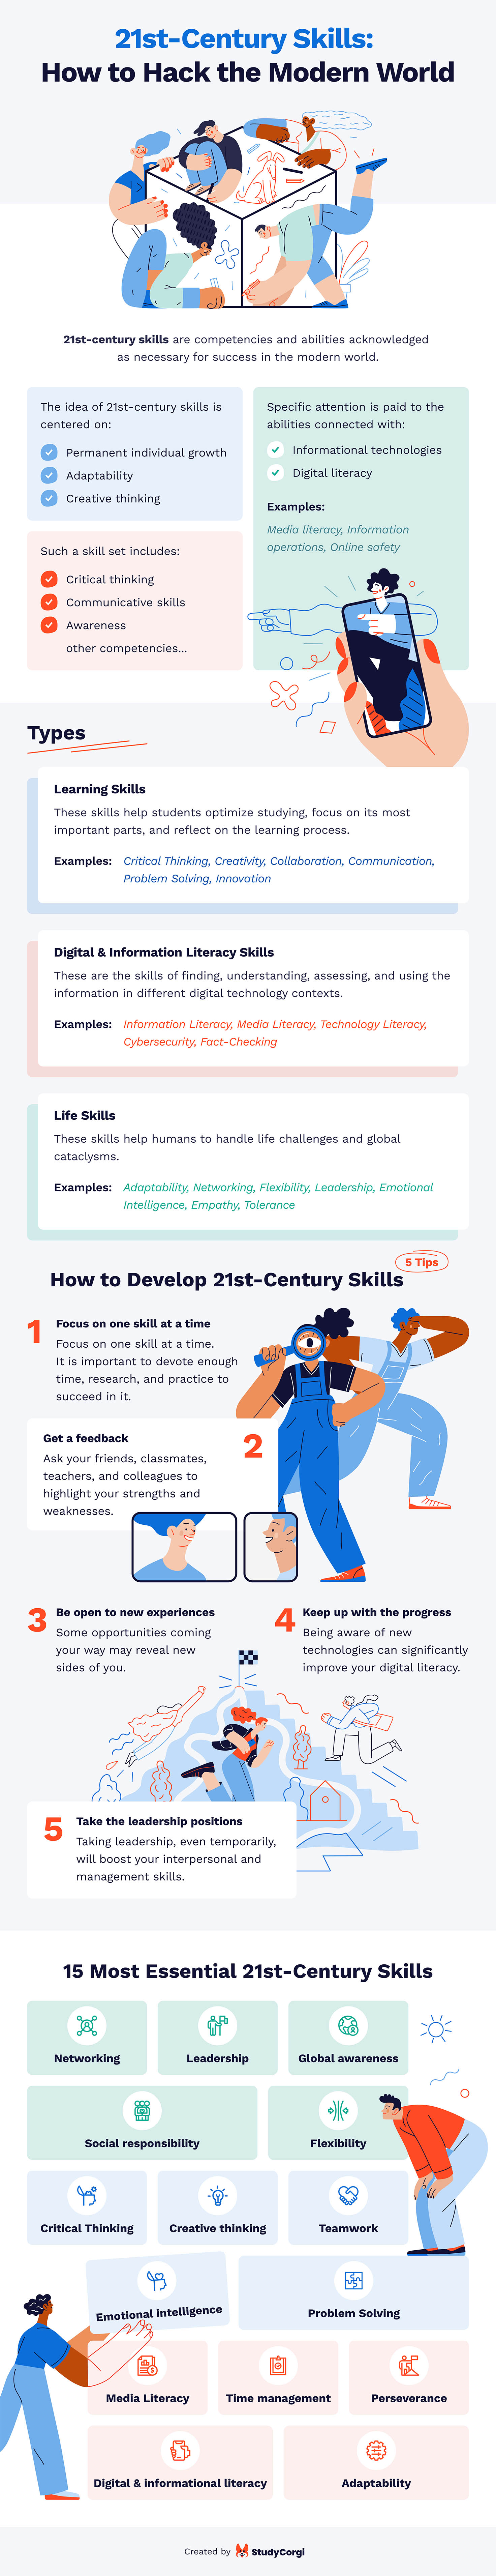 Infographic -- 21st-Century Skills That Every Learner Needs